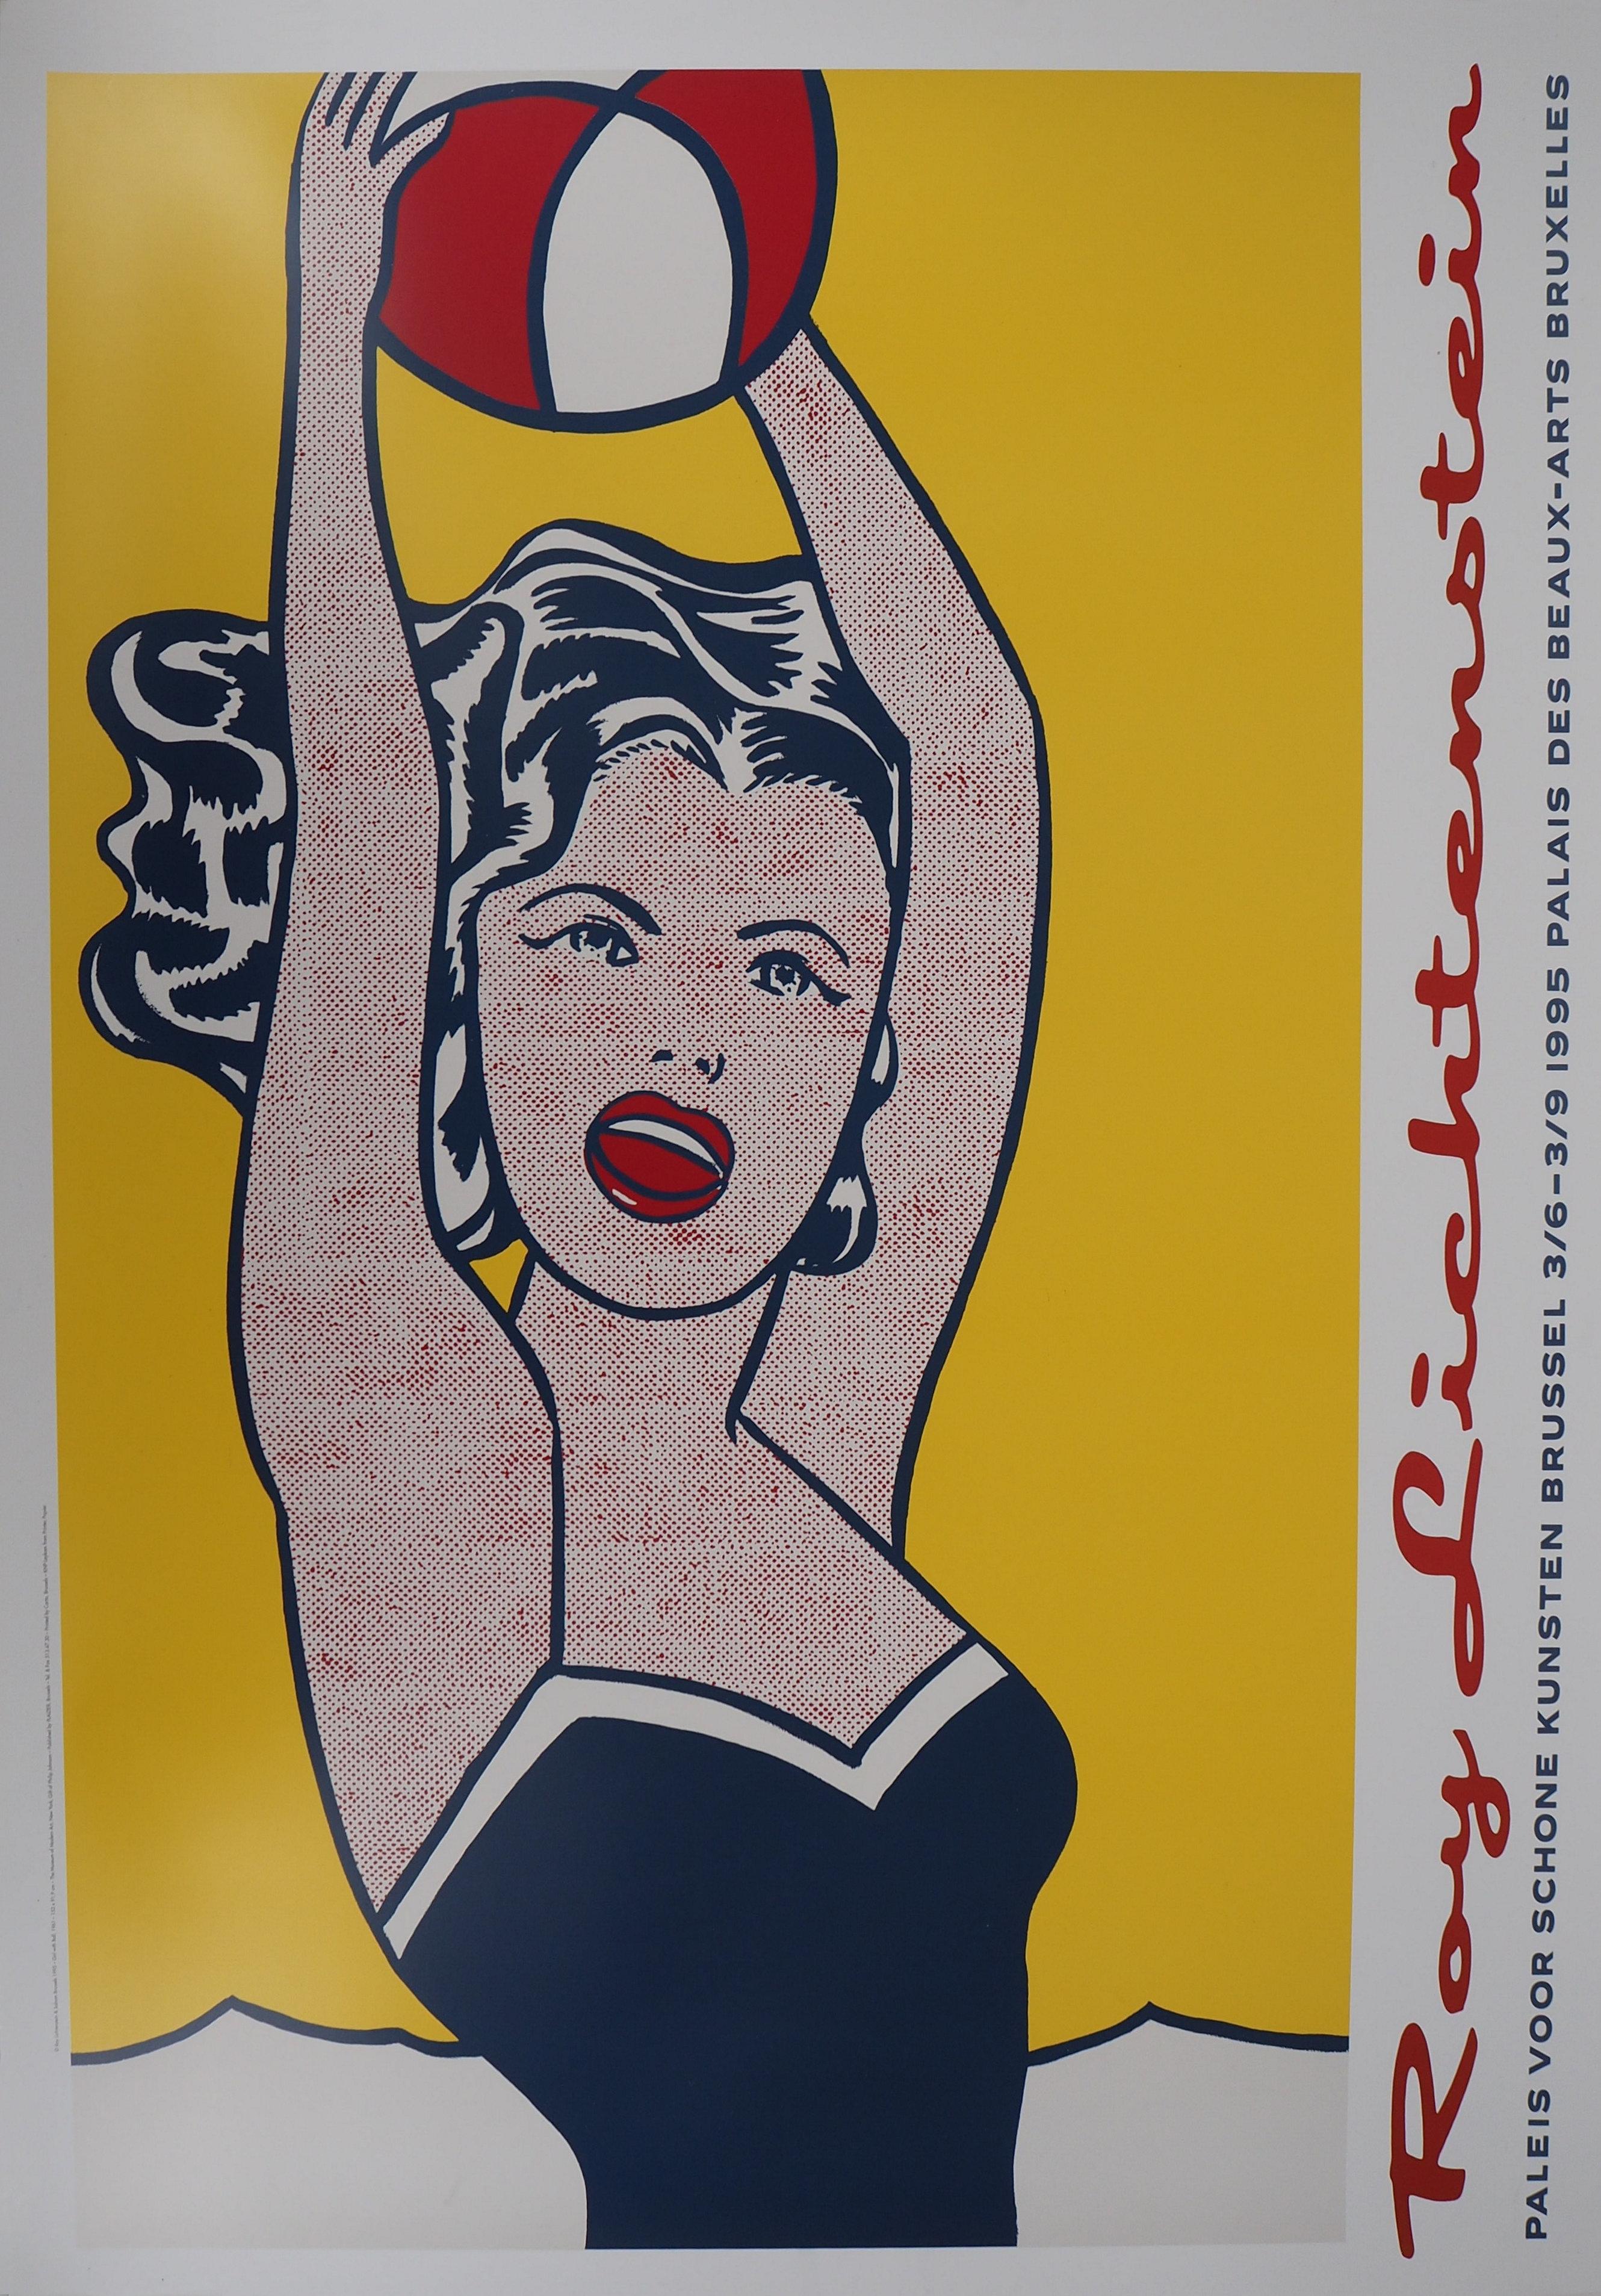 (after) Roy Lichtenstein Figurative Print - Woman with Red Ball - Original vintage poster, Bruxelles 1995